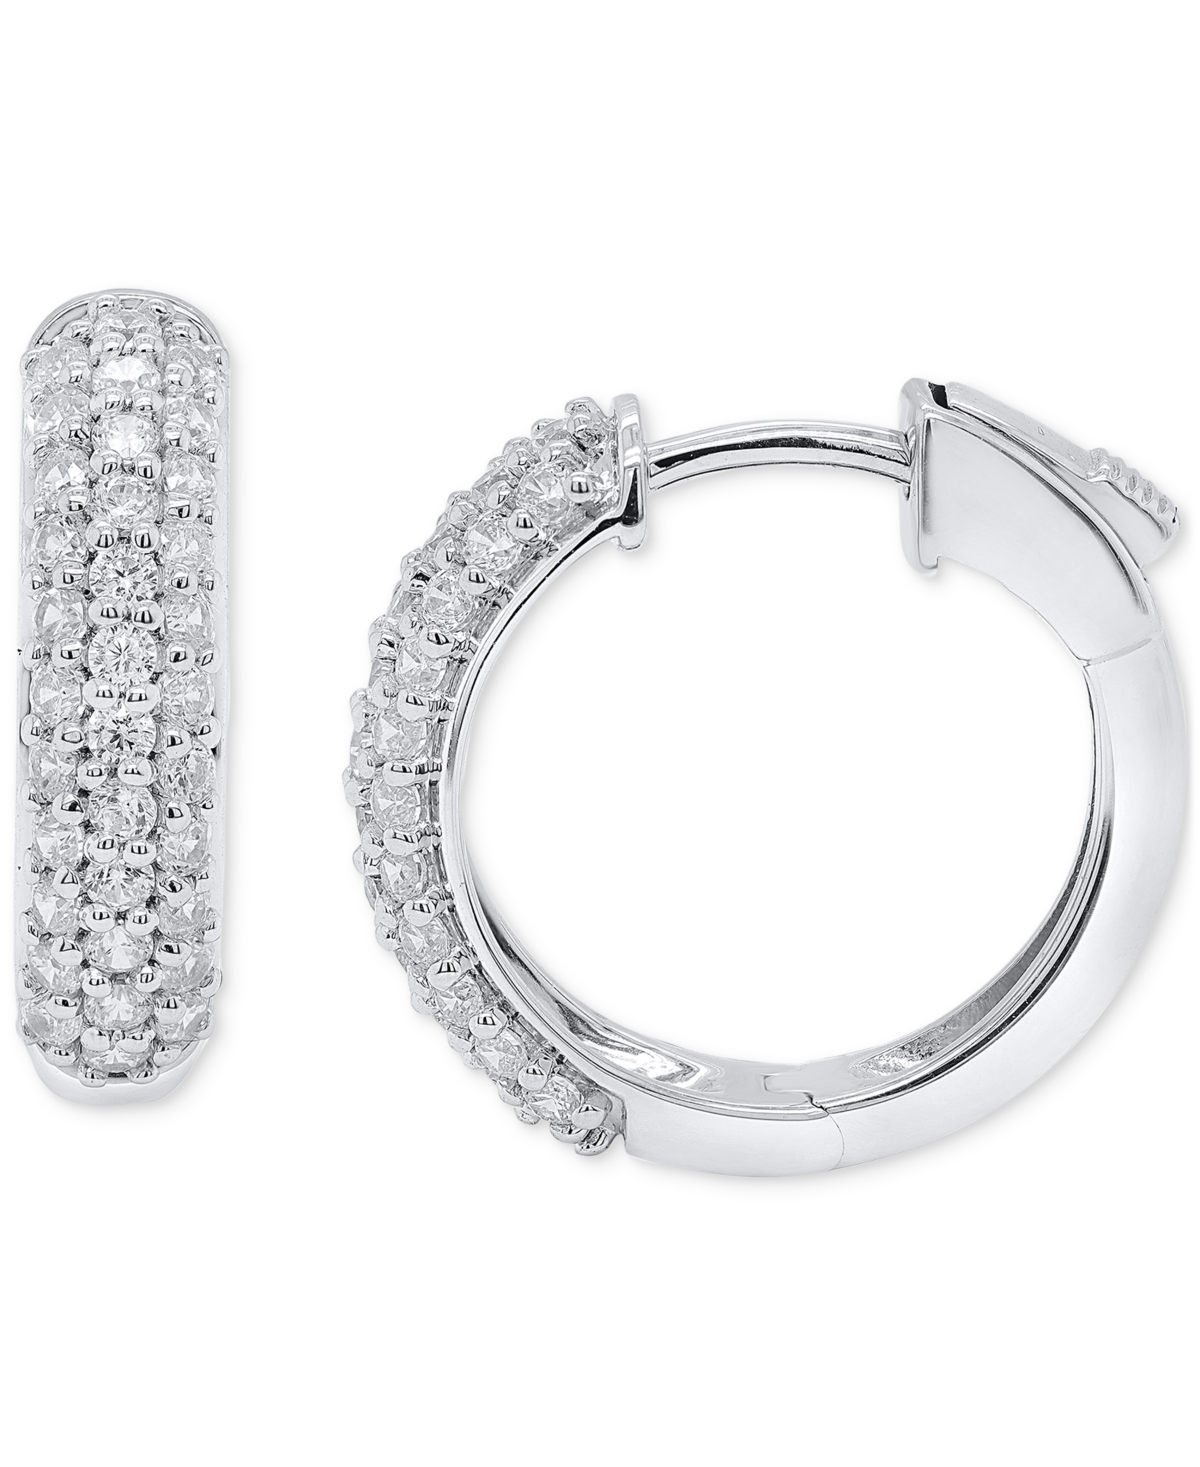 Lab Grown Diamond Pave Small Hoop Earrings (1 ct. t.w.) in Sterling Silver - Sterling Silver